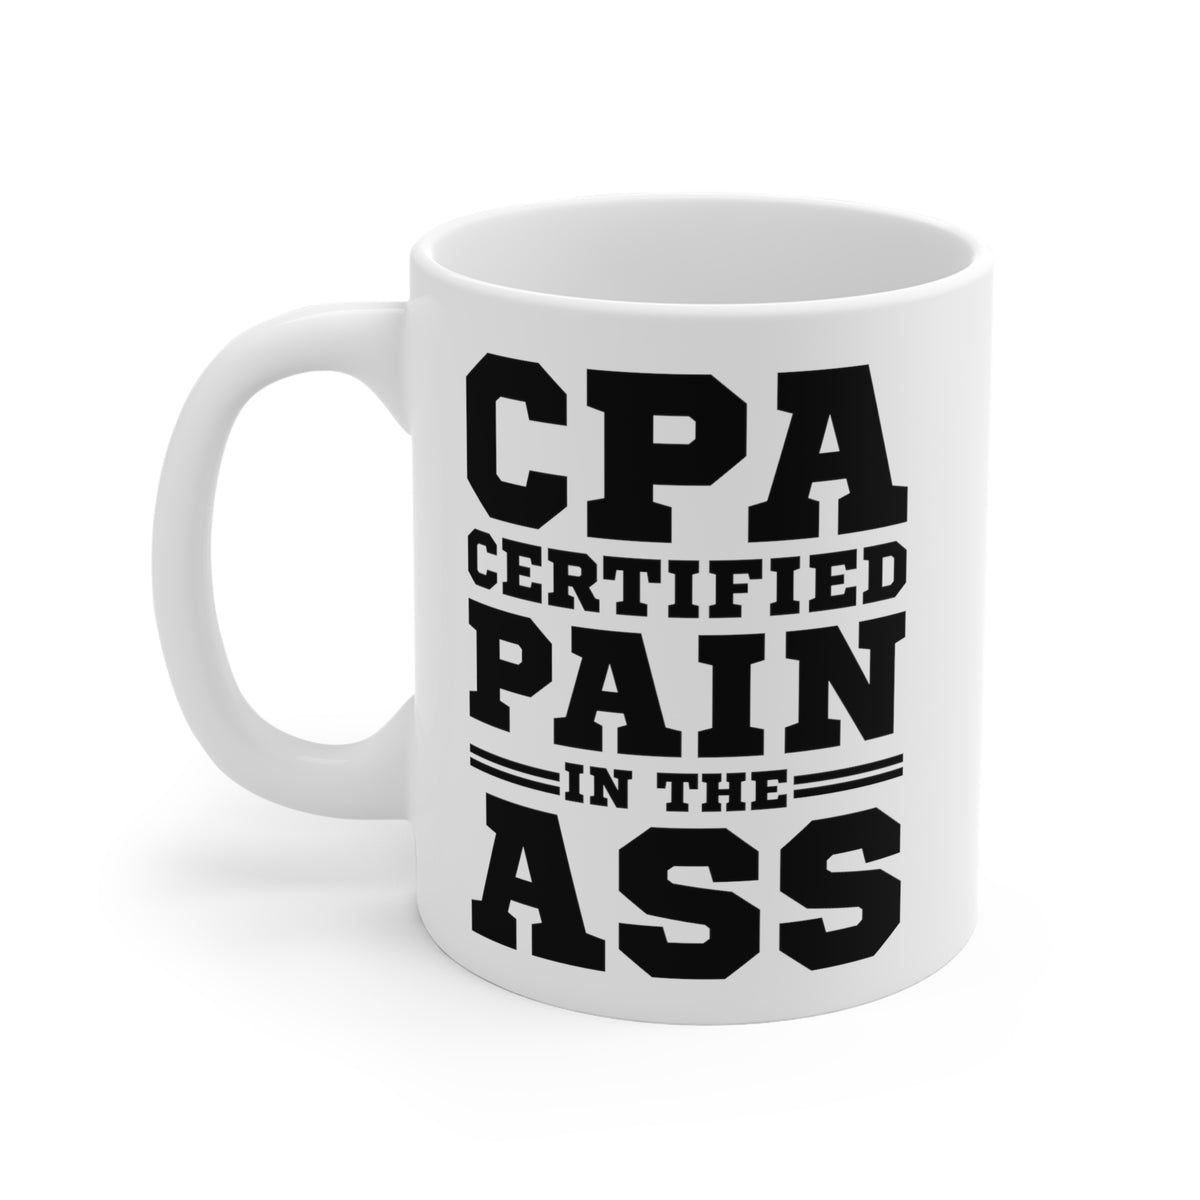 CPA. Certified Pain In The Ass Coffee Mug - 11oz Mug - Funny Gift For Accountant